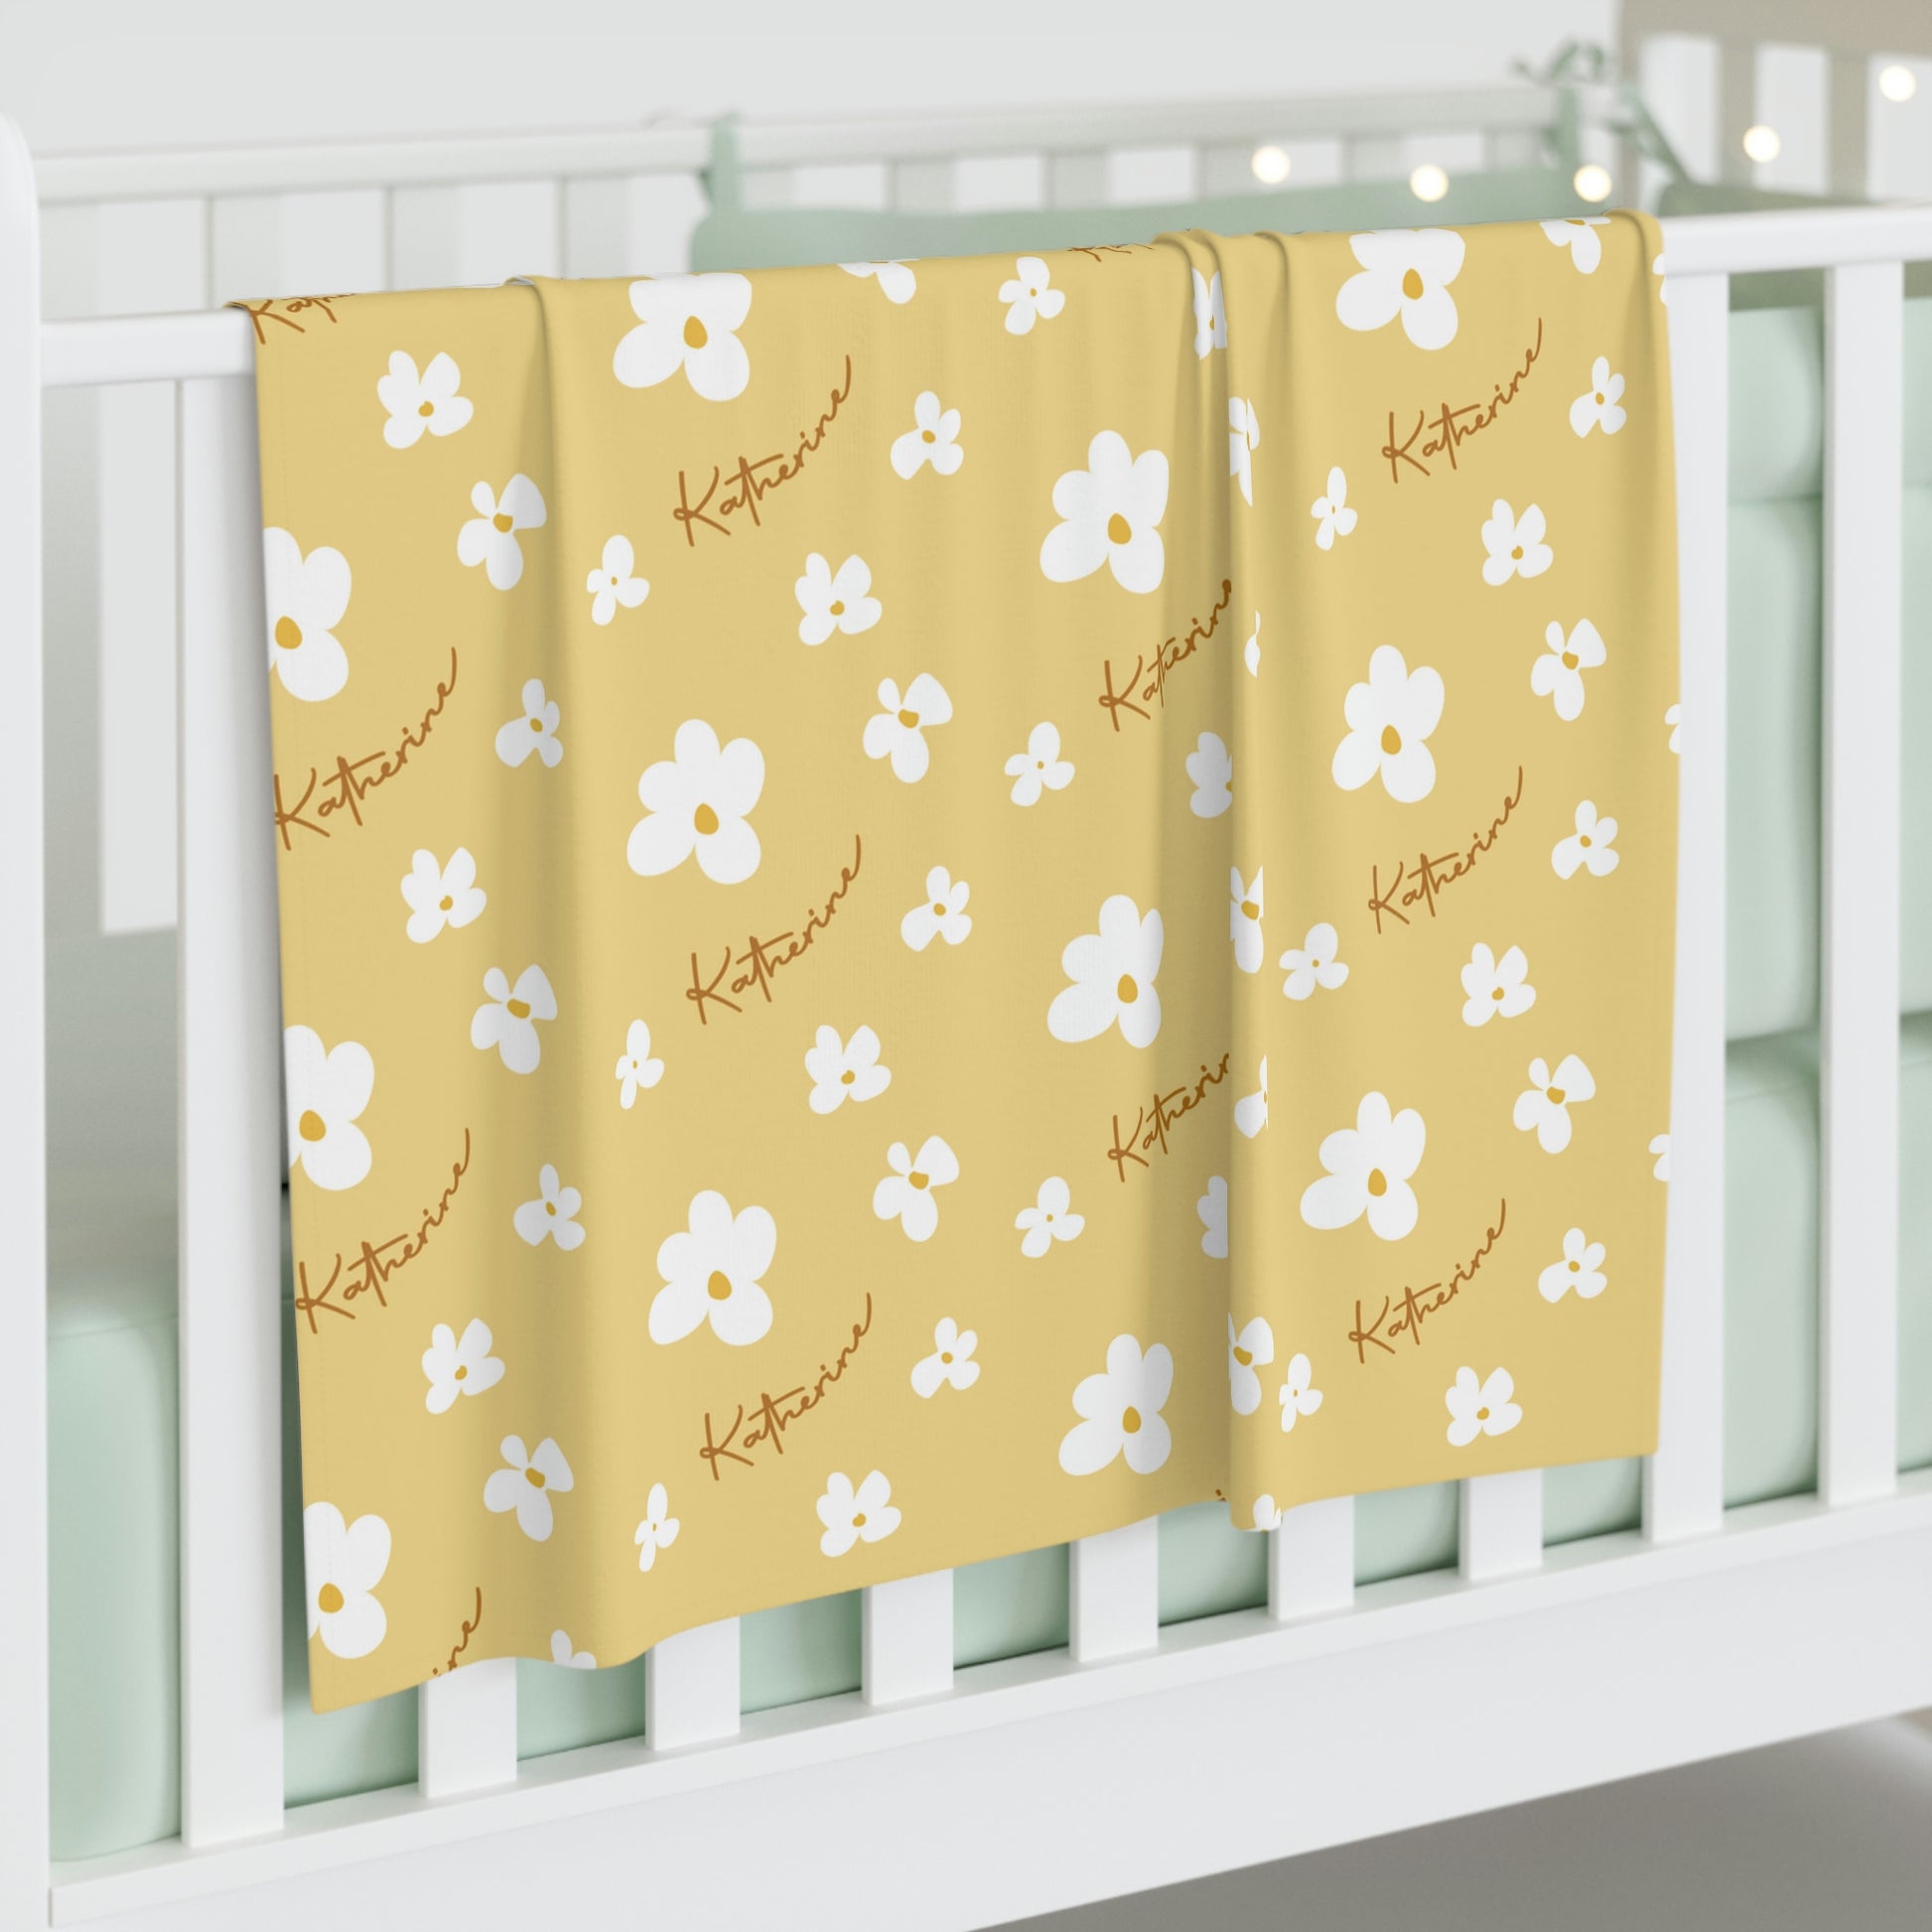 Jersey personalized baby blanket in yellow daisy pattern hung over side of white crib